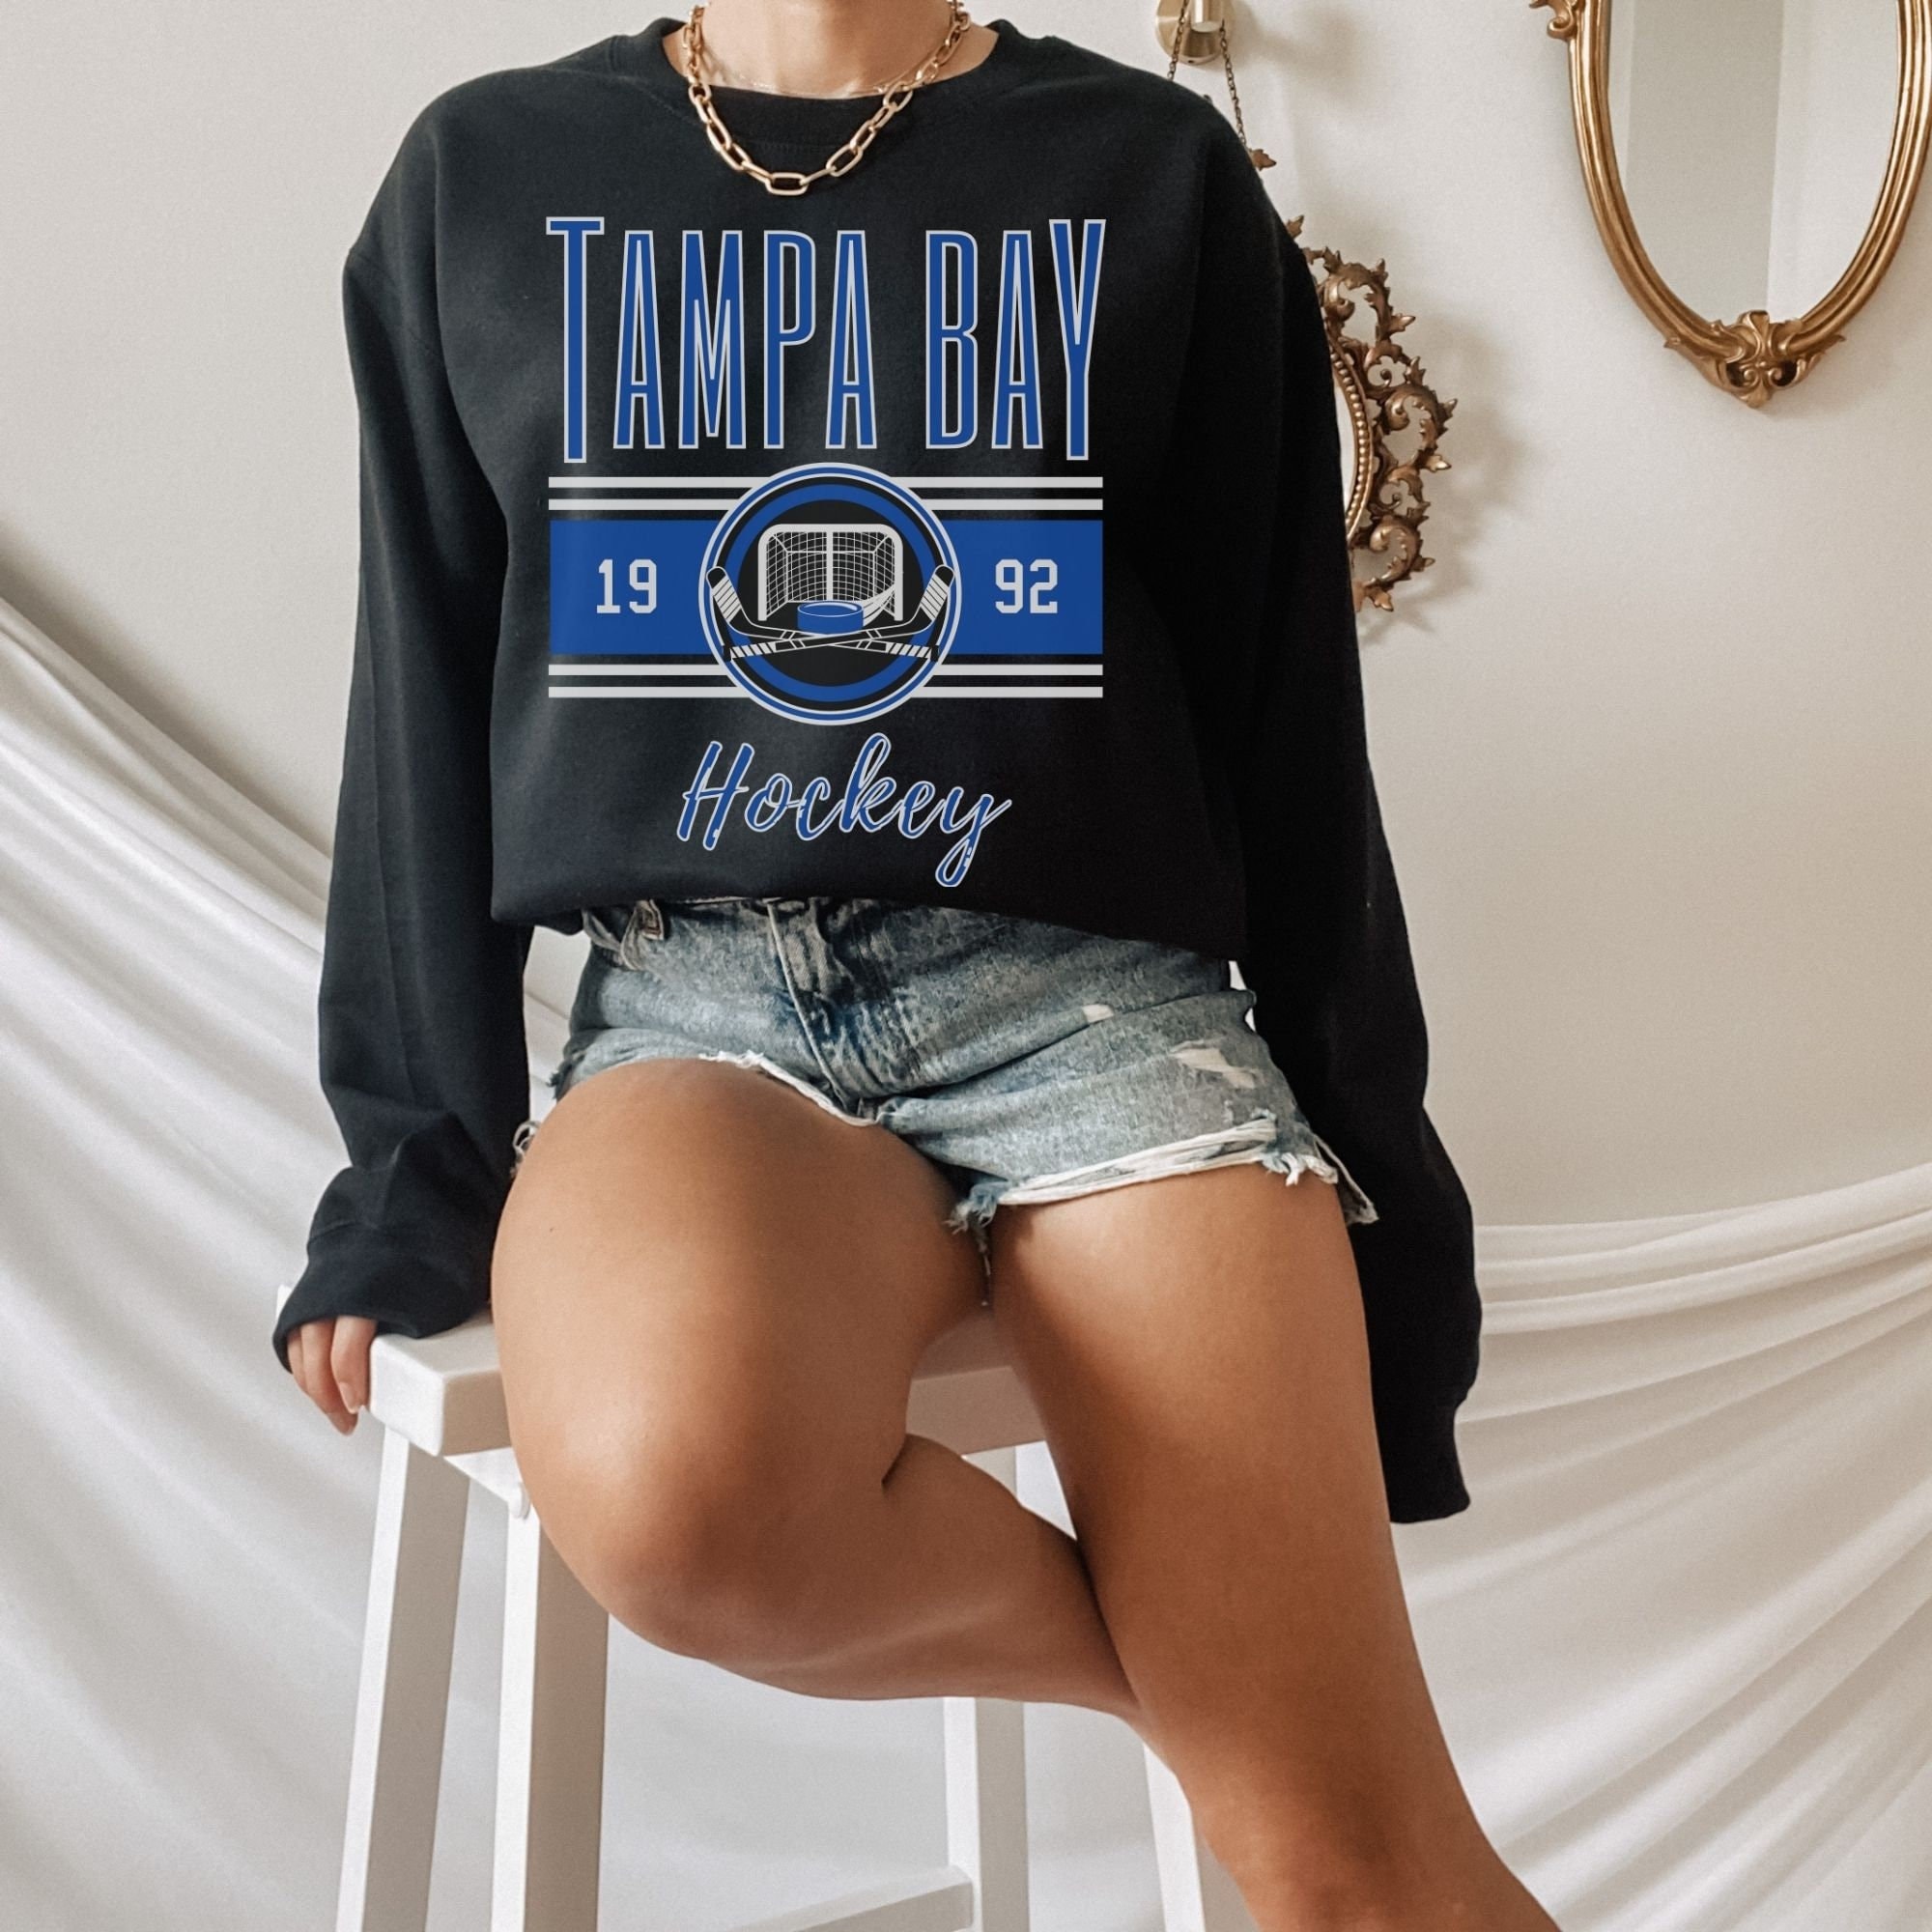 NHL Tampa Bay Lightning It's In My DNA Family Tradition Passed Down For  Years shirt, hoodie, sweater, long sleeve and tank top